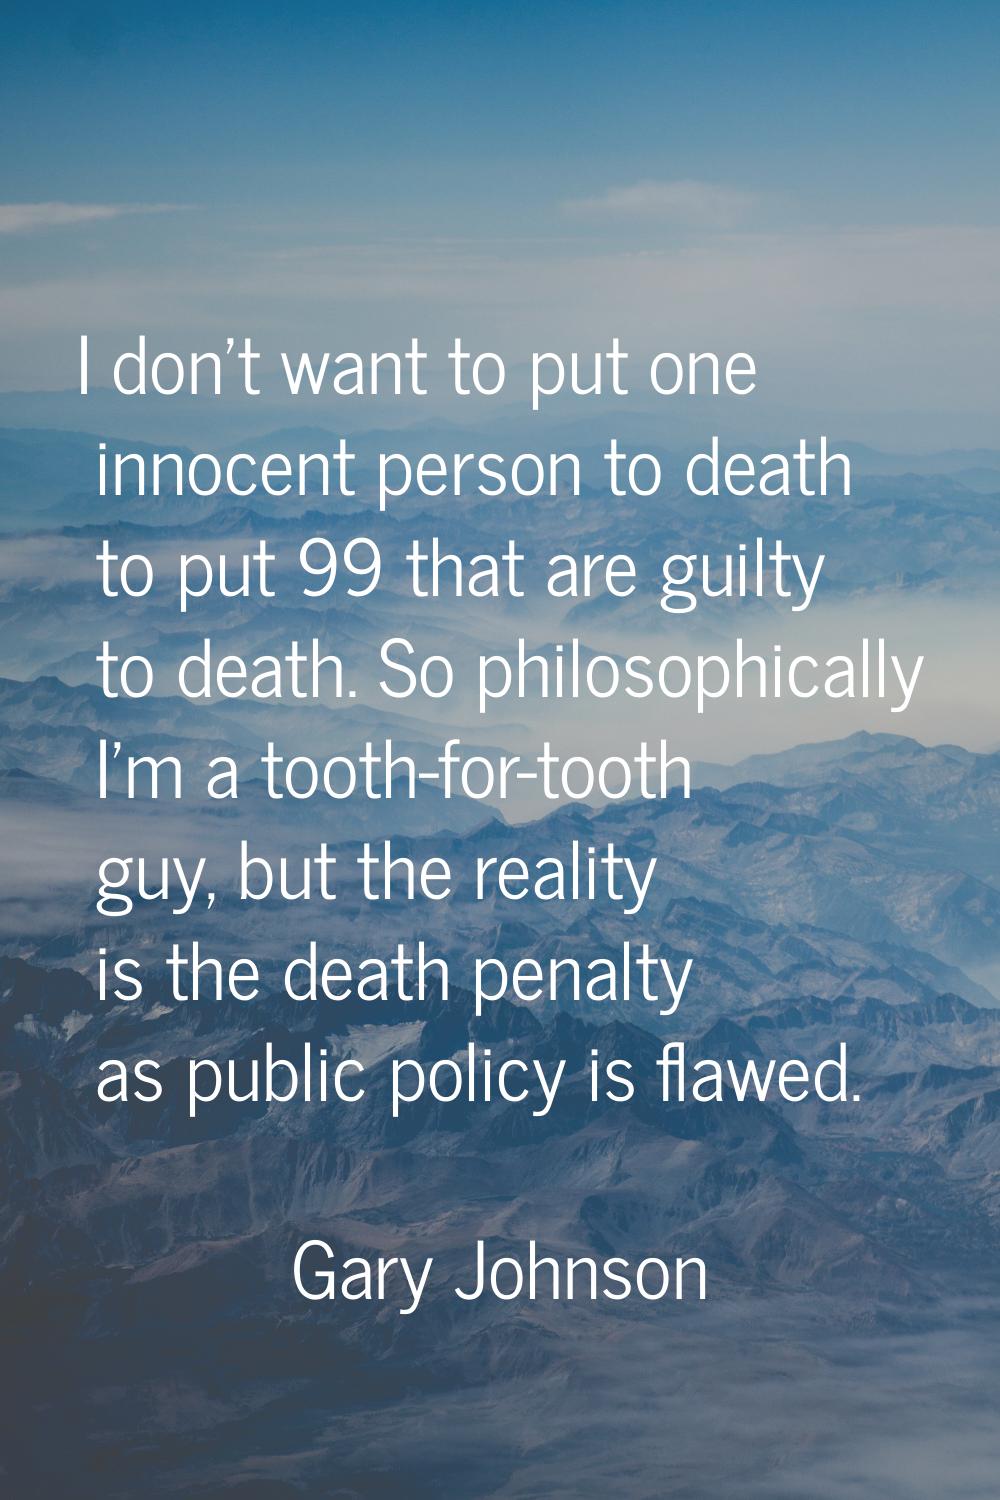 I don't want to put one innocent person to death to put 99 that are guilty to death. So philosophic